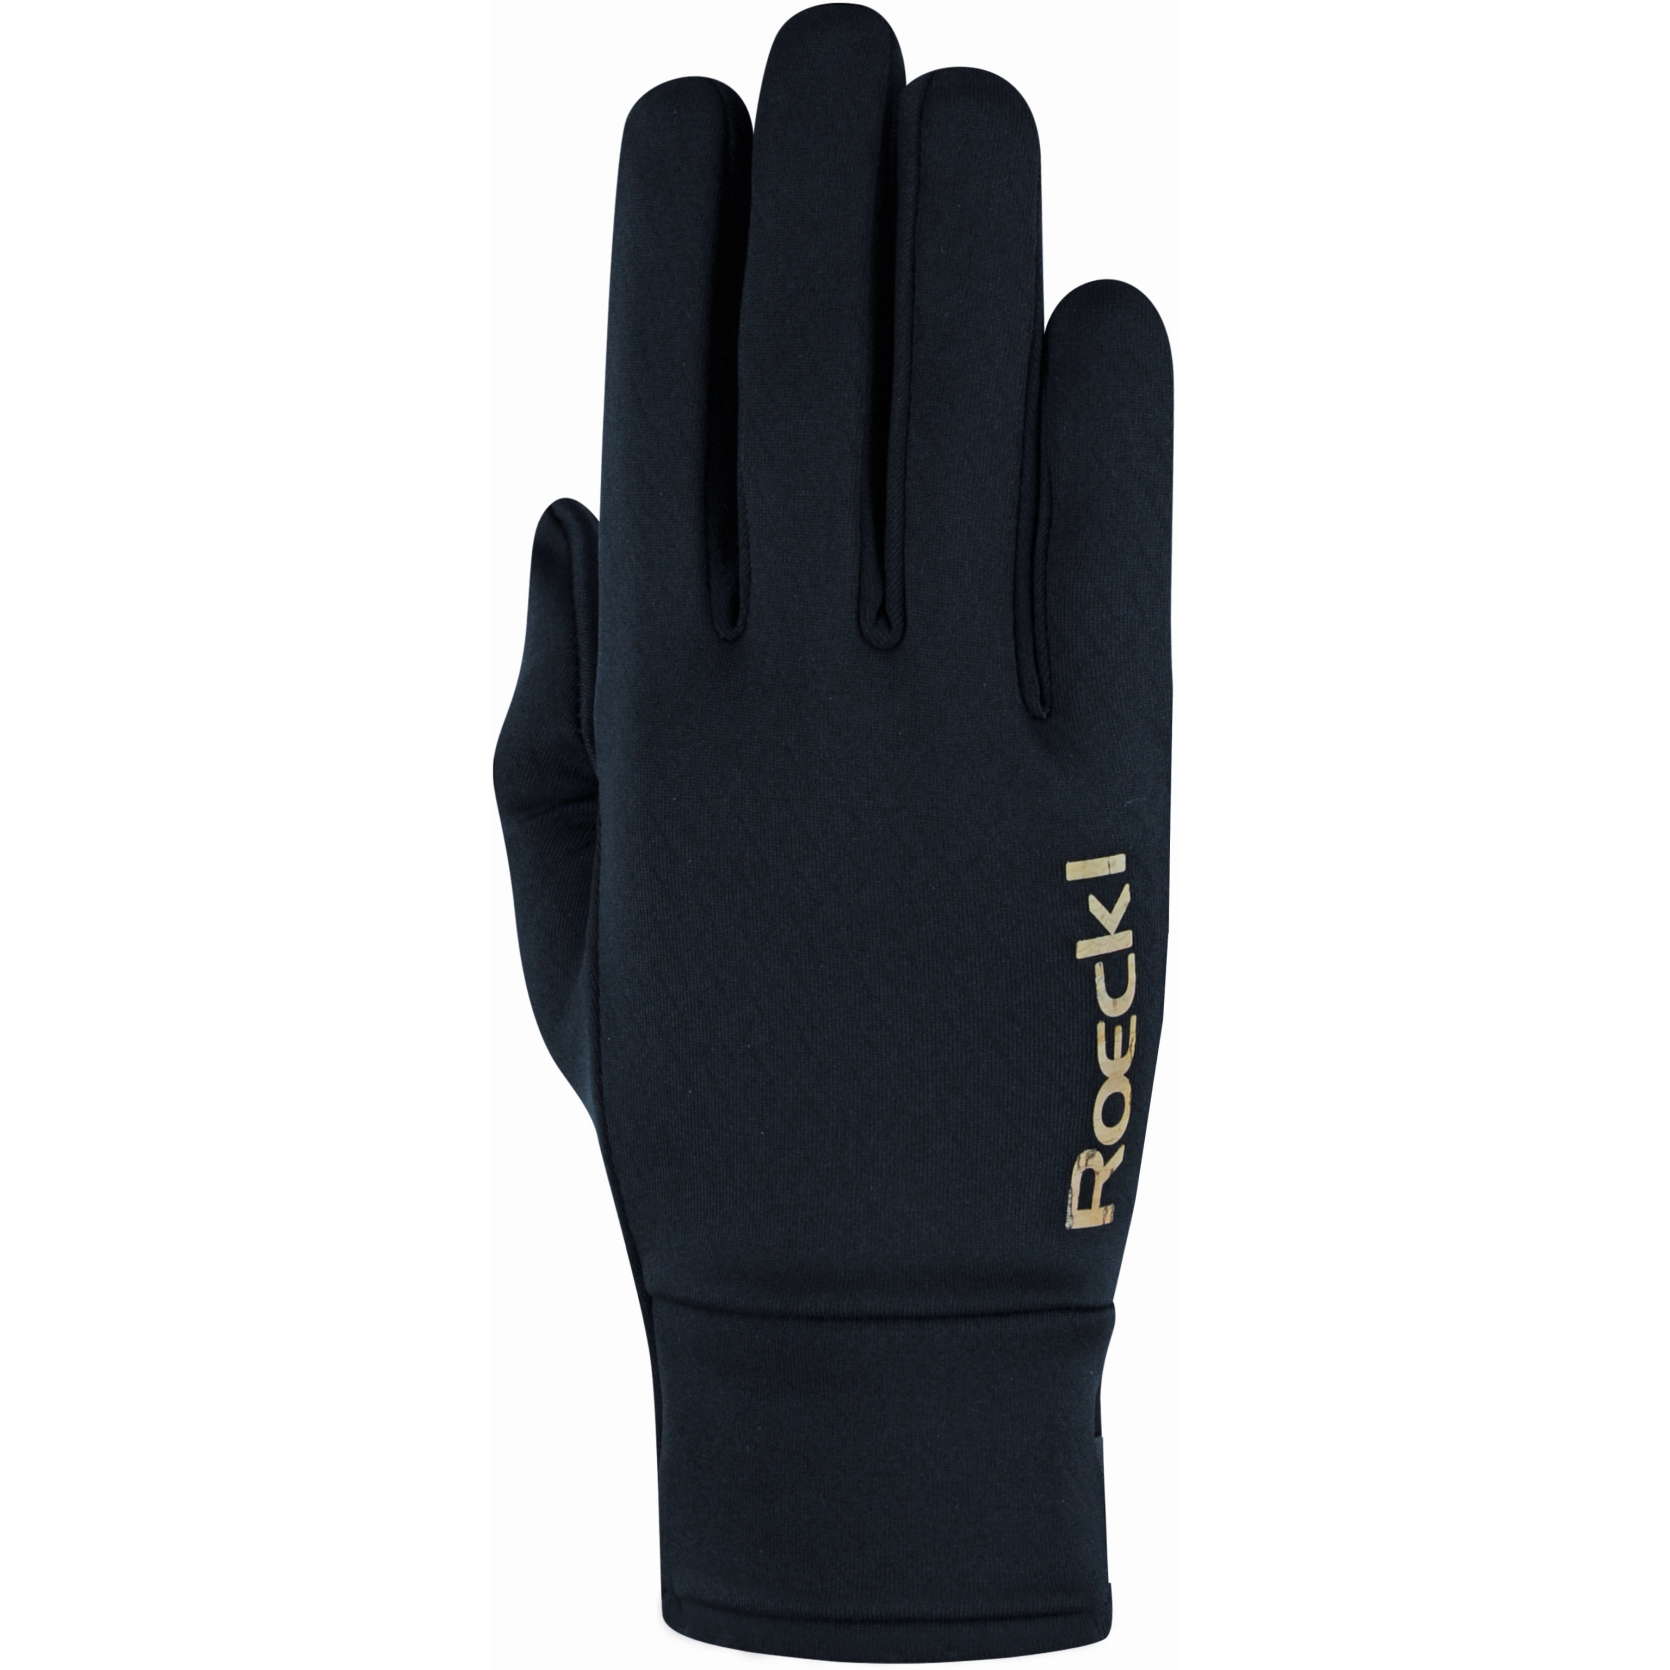 Picture of Roeckl Sports Kamui Winter Gloves - black 0999